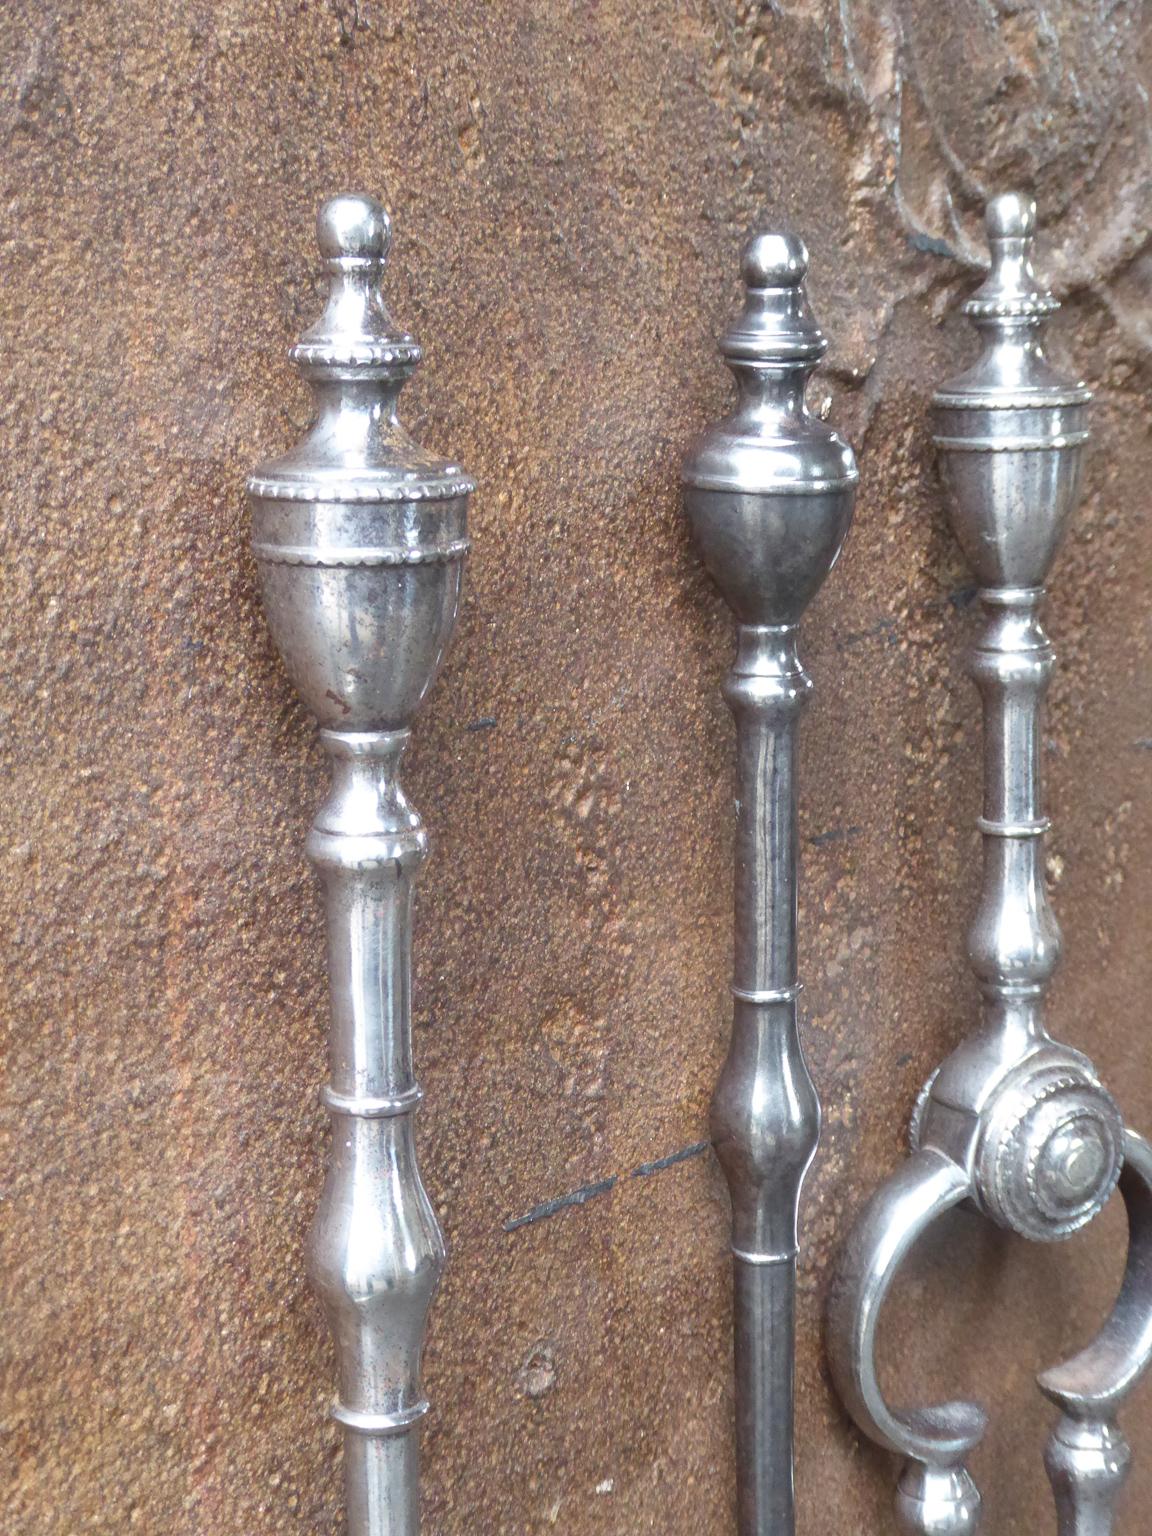 Elegant Georgian set of of three tools with bulbous sections on the shafts, with tall lidded and knopped urn finial handles and a finely pierced & cut shovel. The fire tools are made of polished steel. The set is in a good condition and is fully